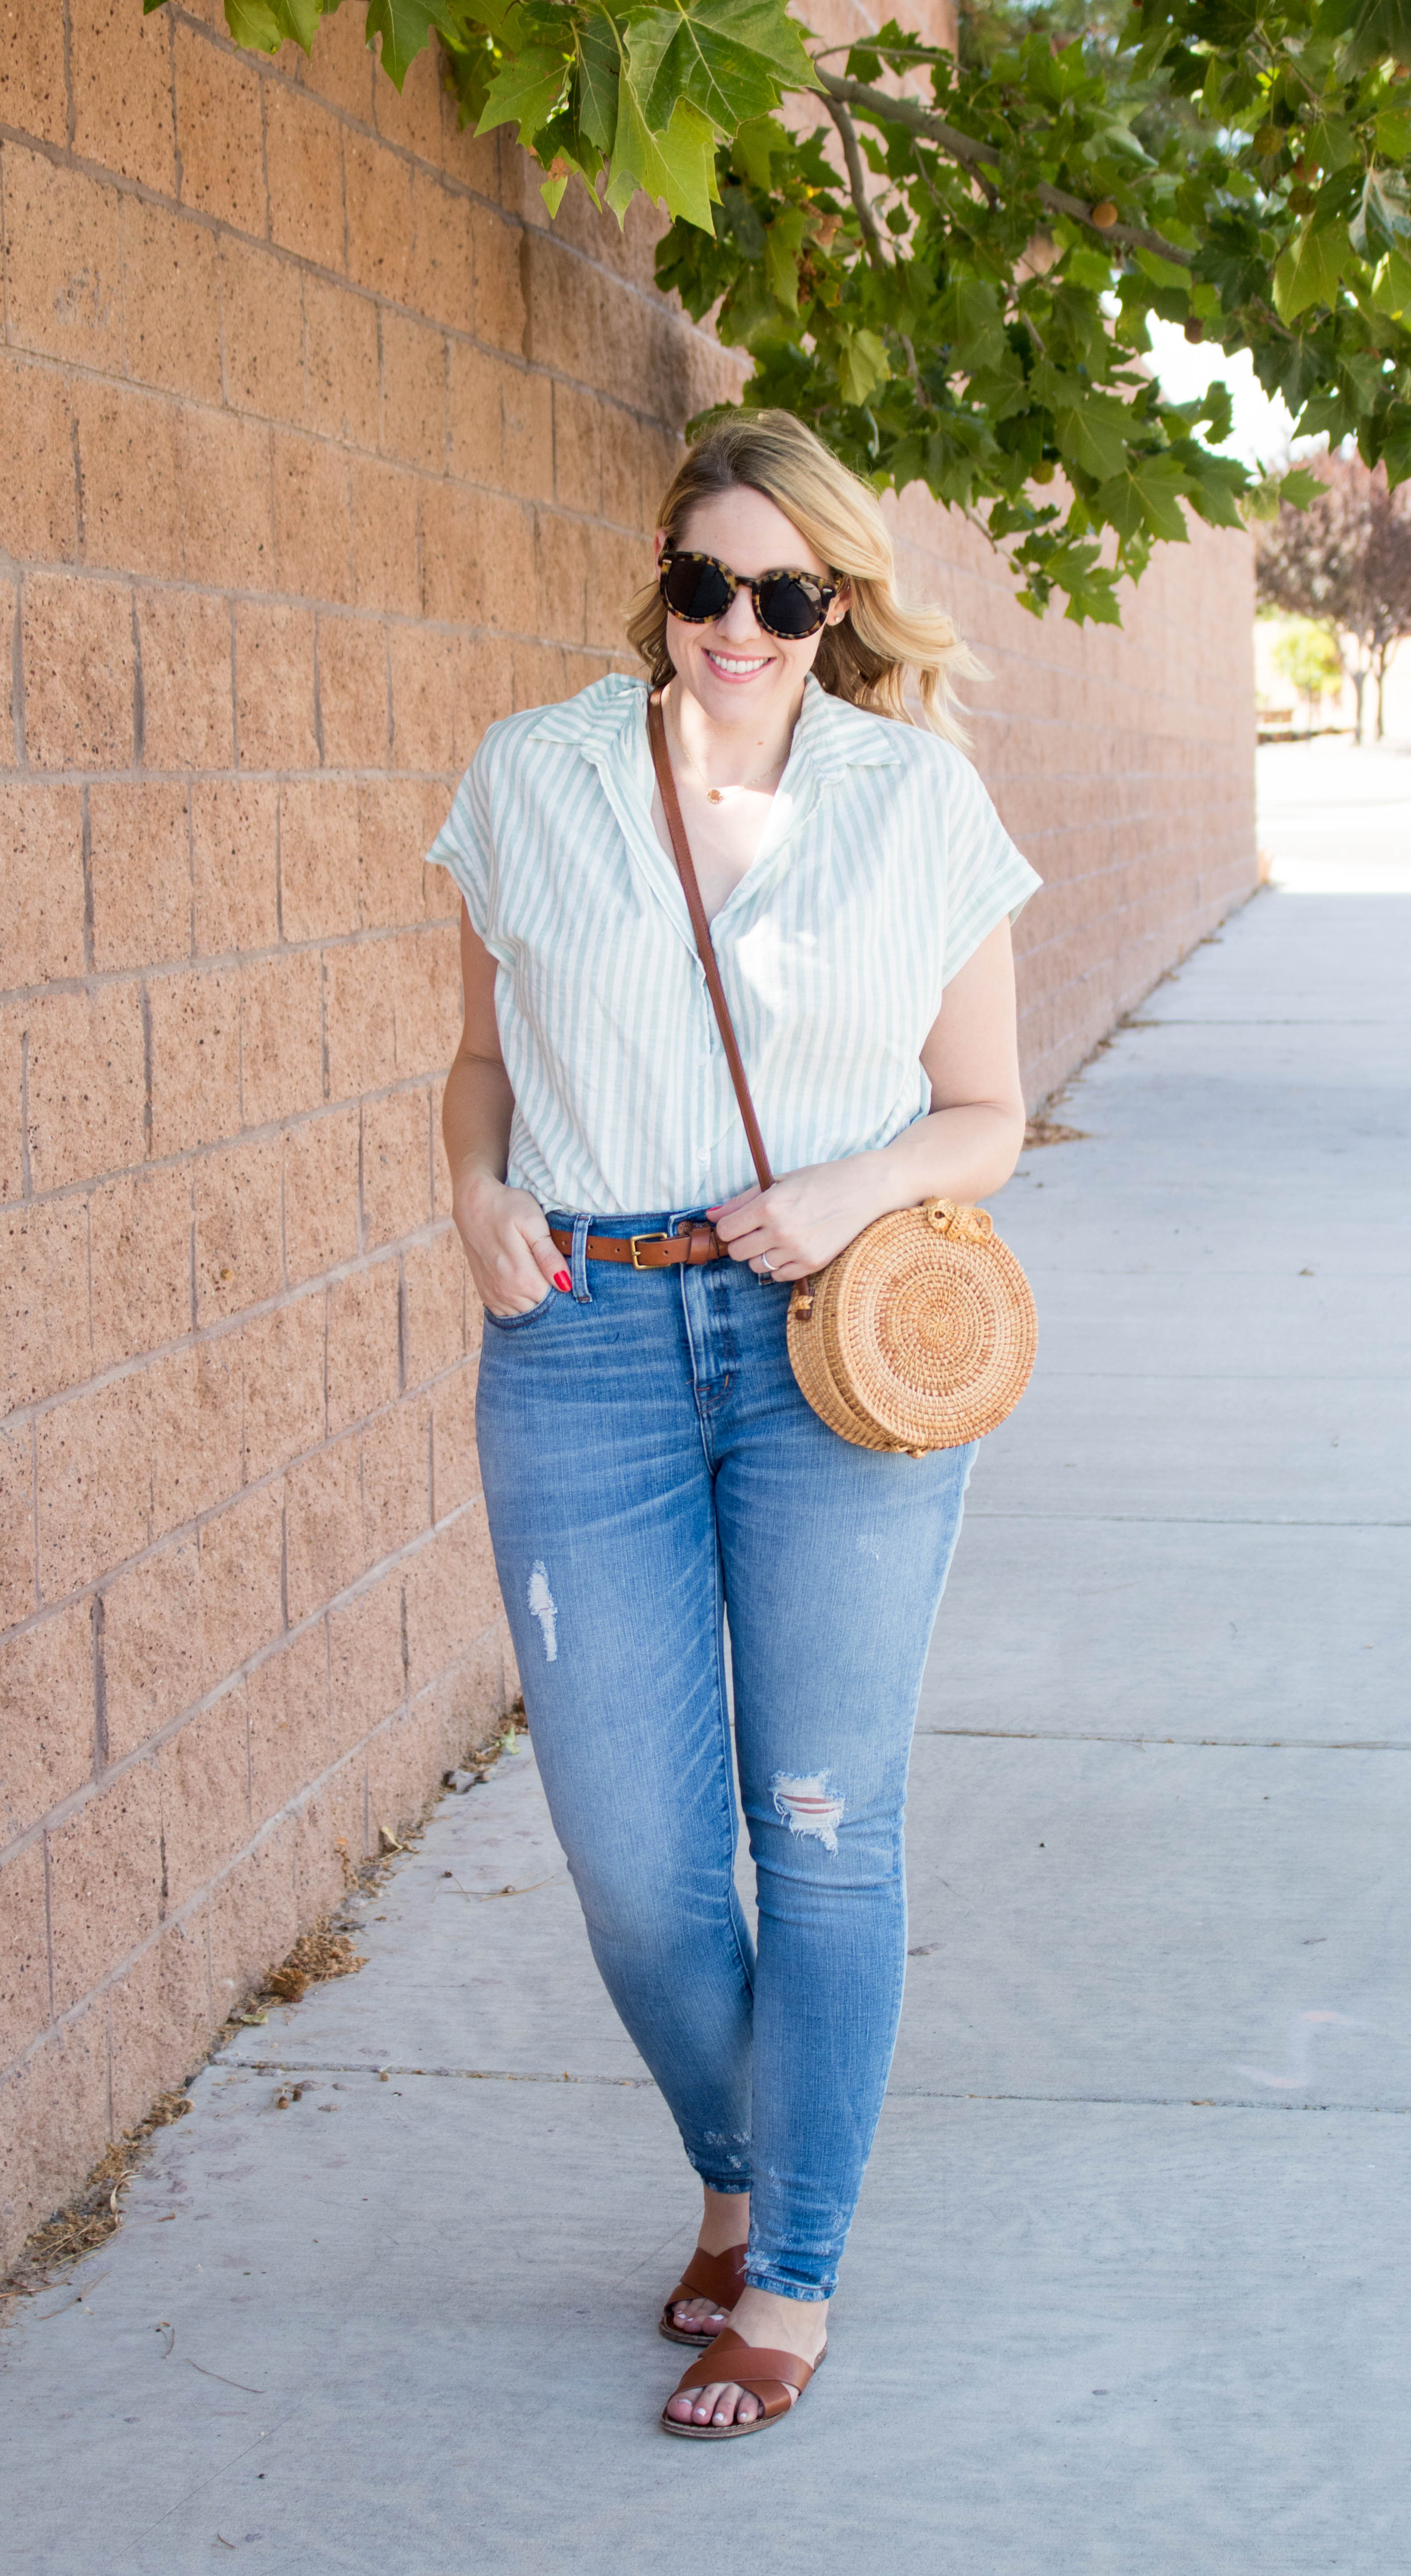 circle rattan statement bag #circlebag #summerstyle #summer #jeansoutfit